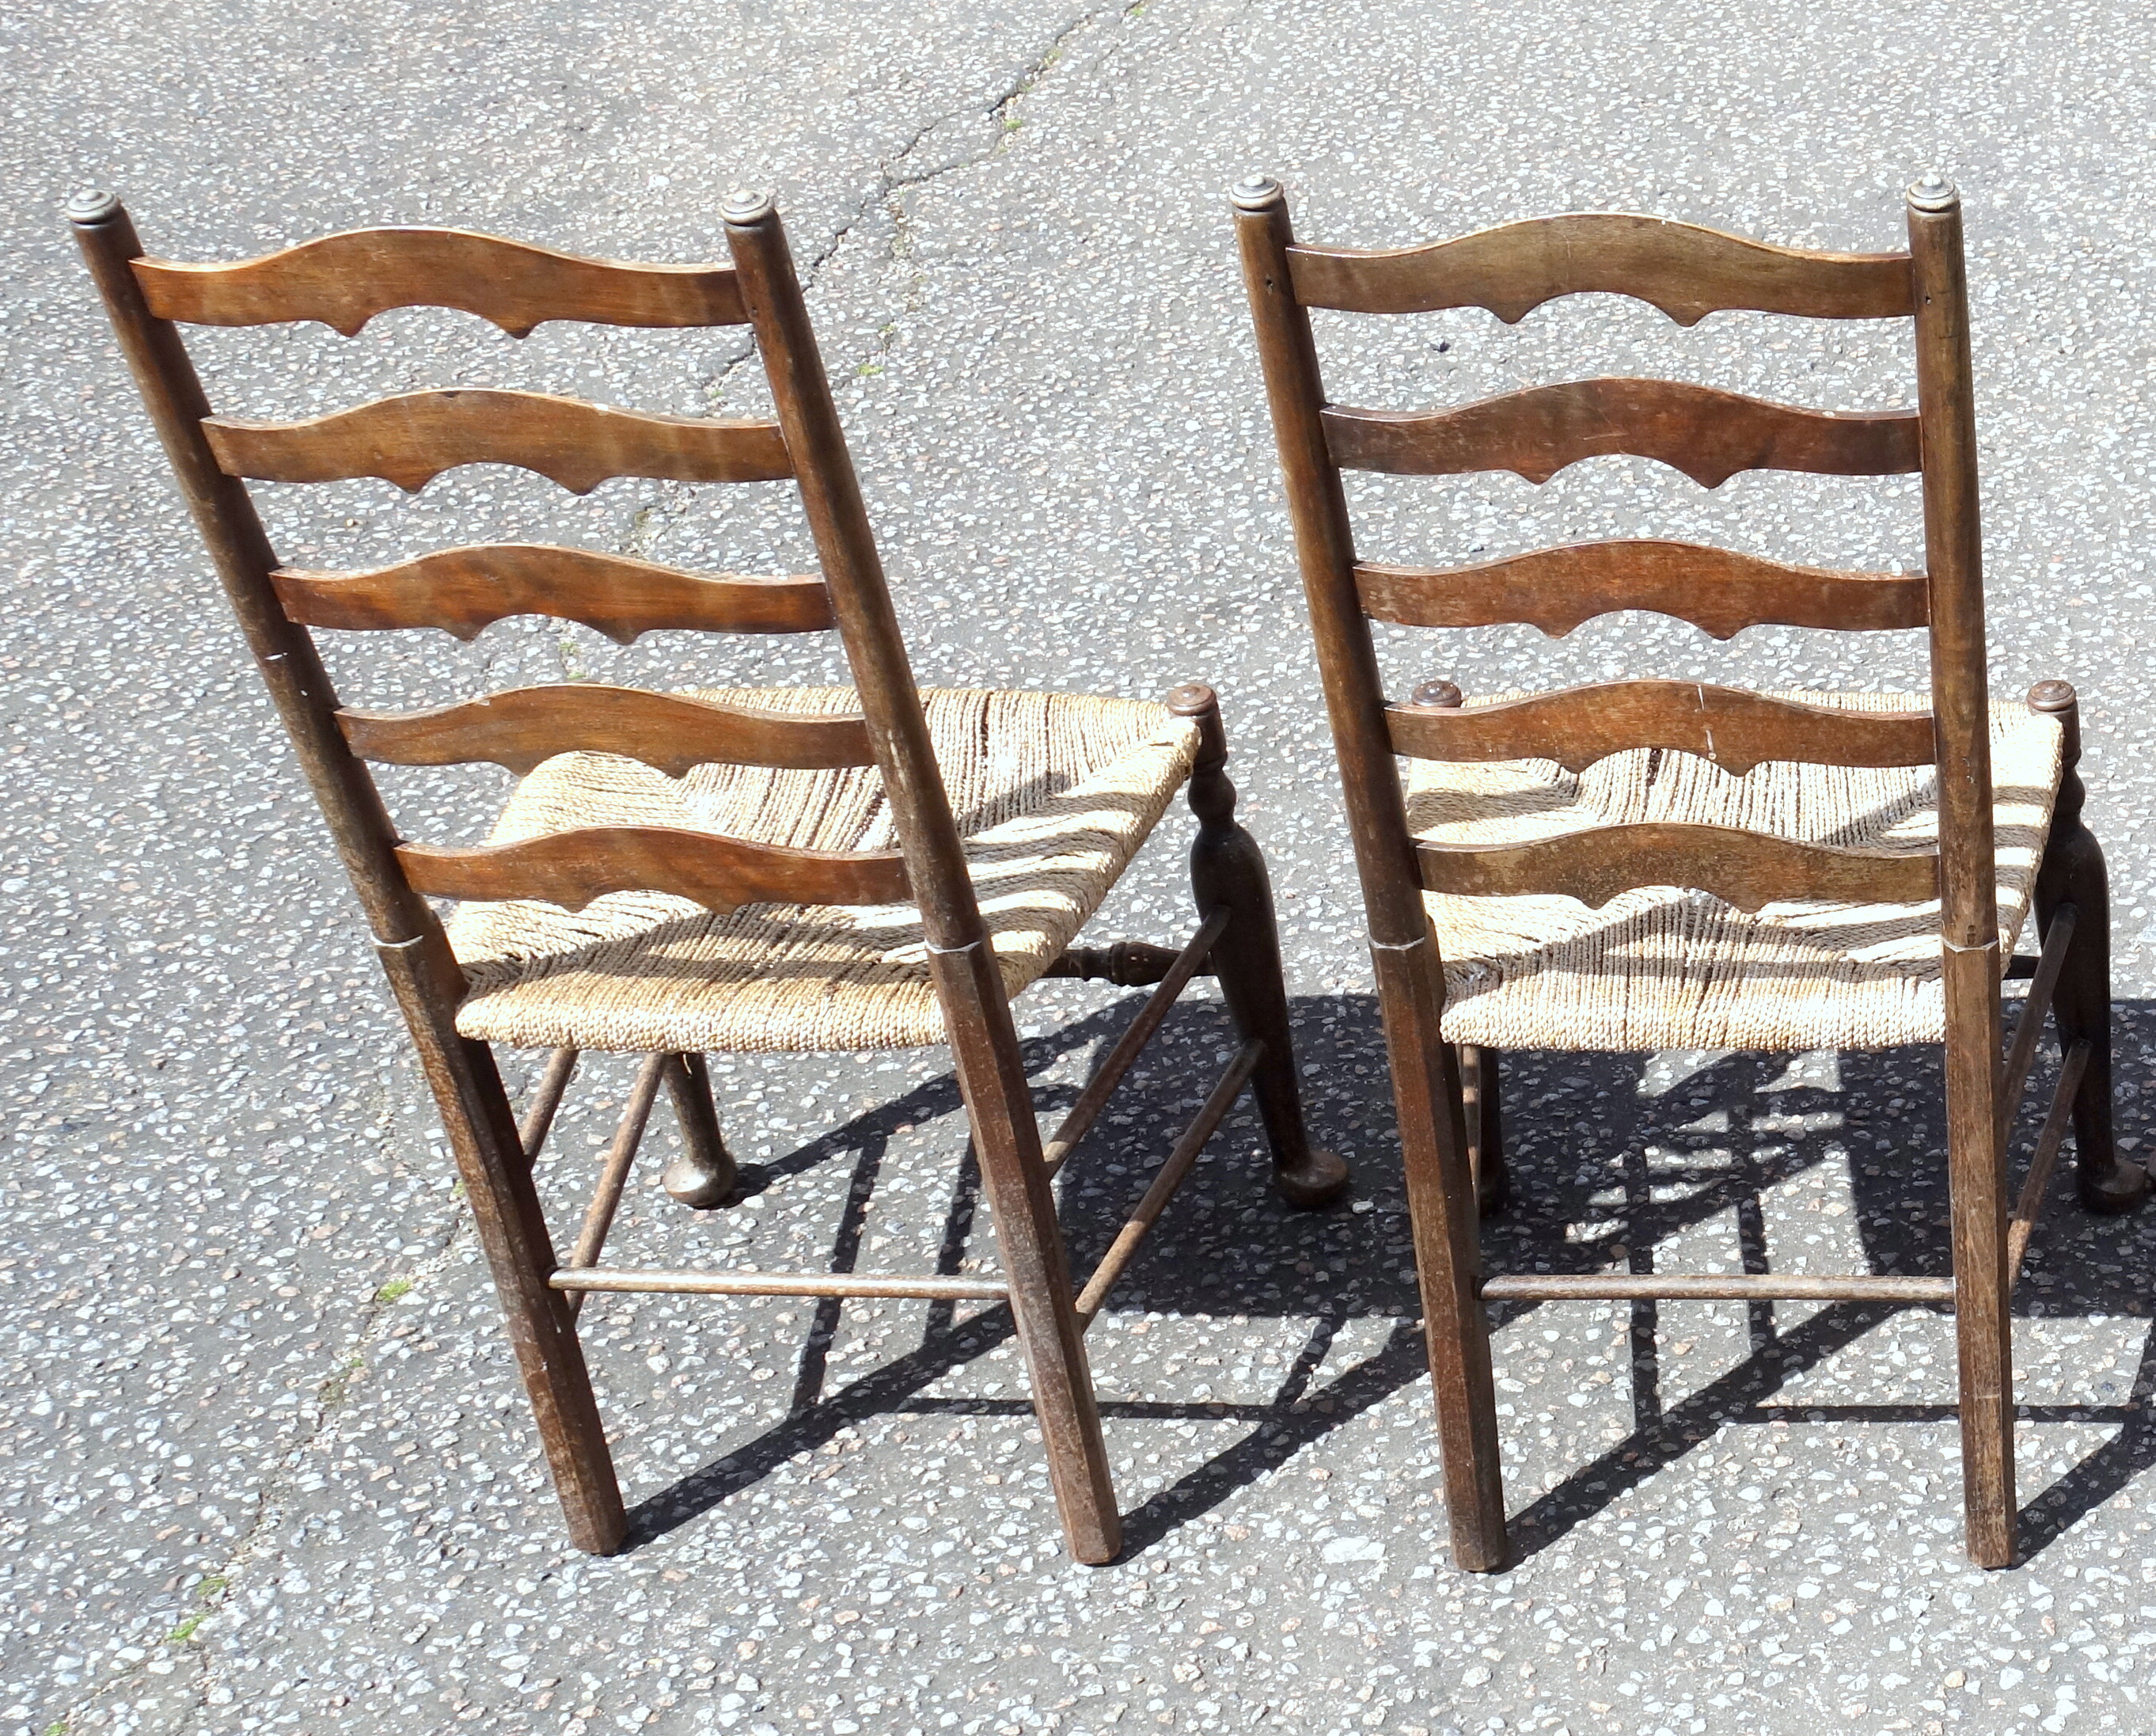 Pair of 2 Edwardian Yorkshire style beech chairs, each with a ladder back and seagrass seat - Image 2 of 4